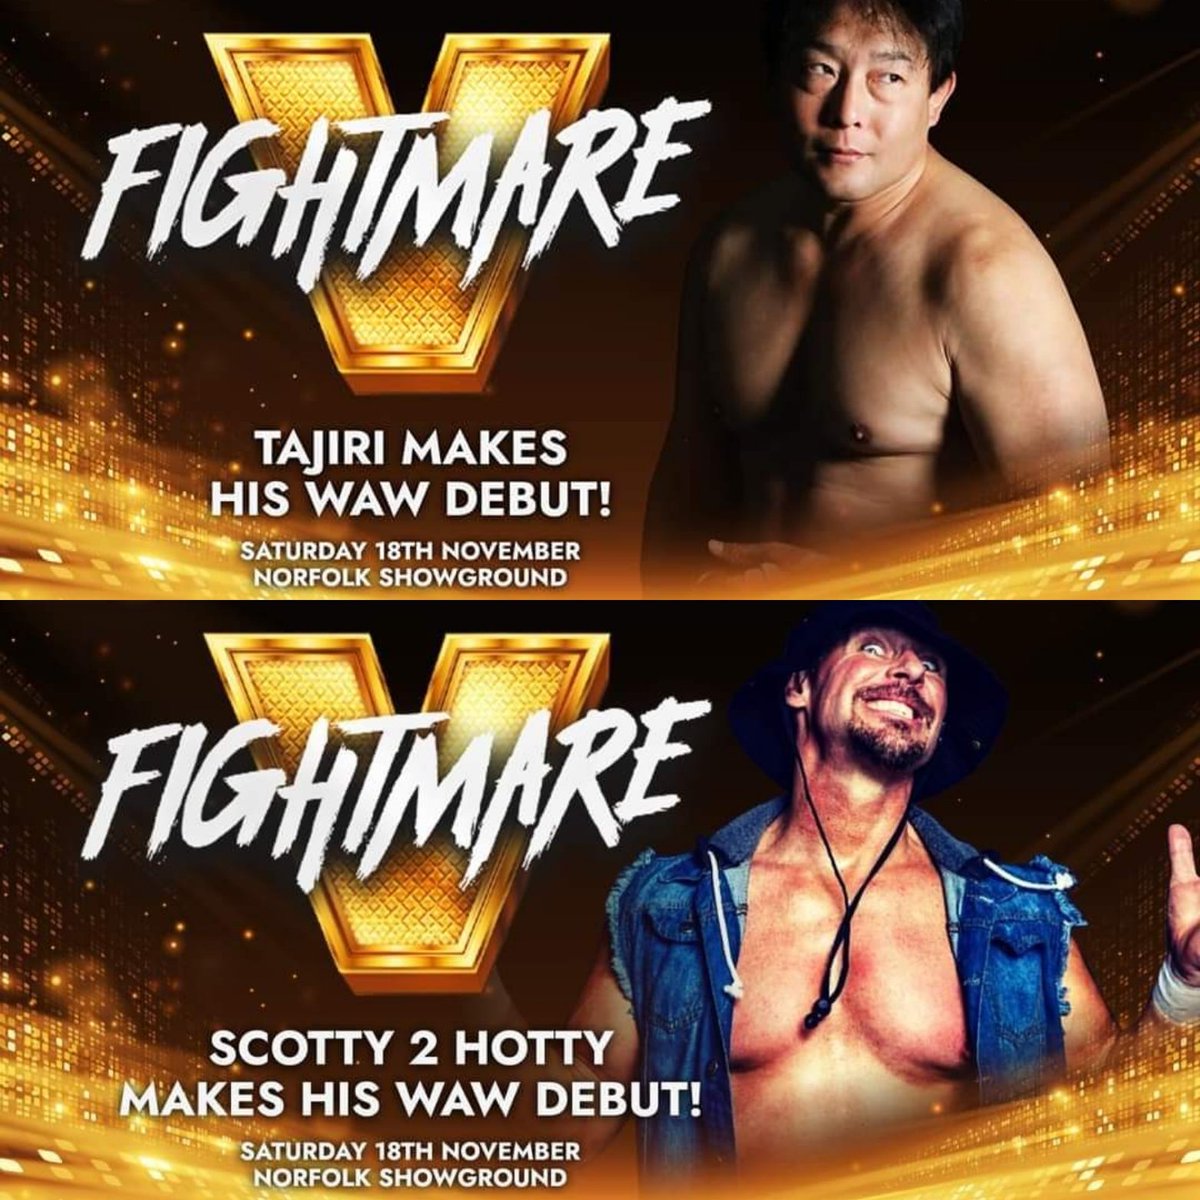 @WAW_UK Fightmare 5, November 18th at the @royalnorfolkshow ground in Norwich, England. 
@TheScottGarland & @TajiriBuzzsaw have been announced so far, and there's more to come. Limited V.I.P left. 

#WAW #Fightmare #Norwich #wrestling #scotty2hotty #tajiri